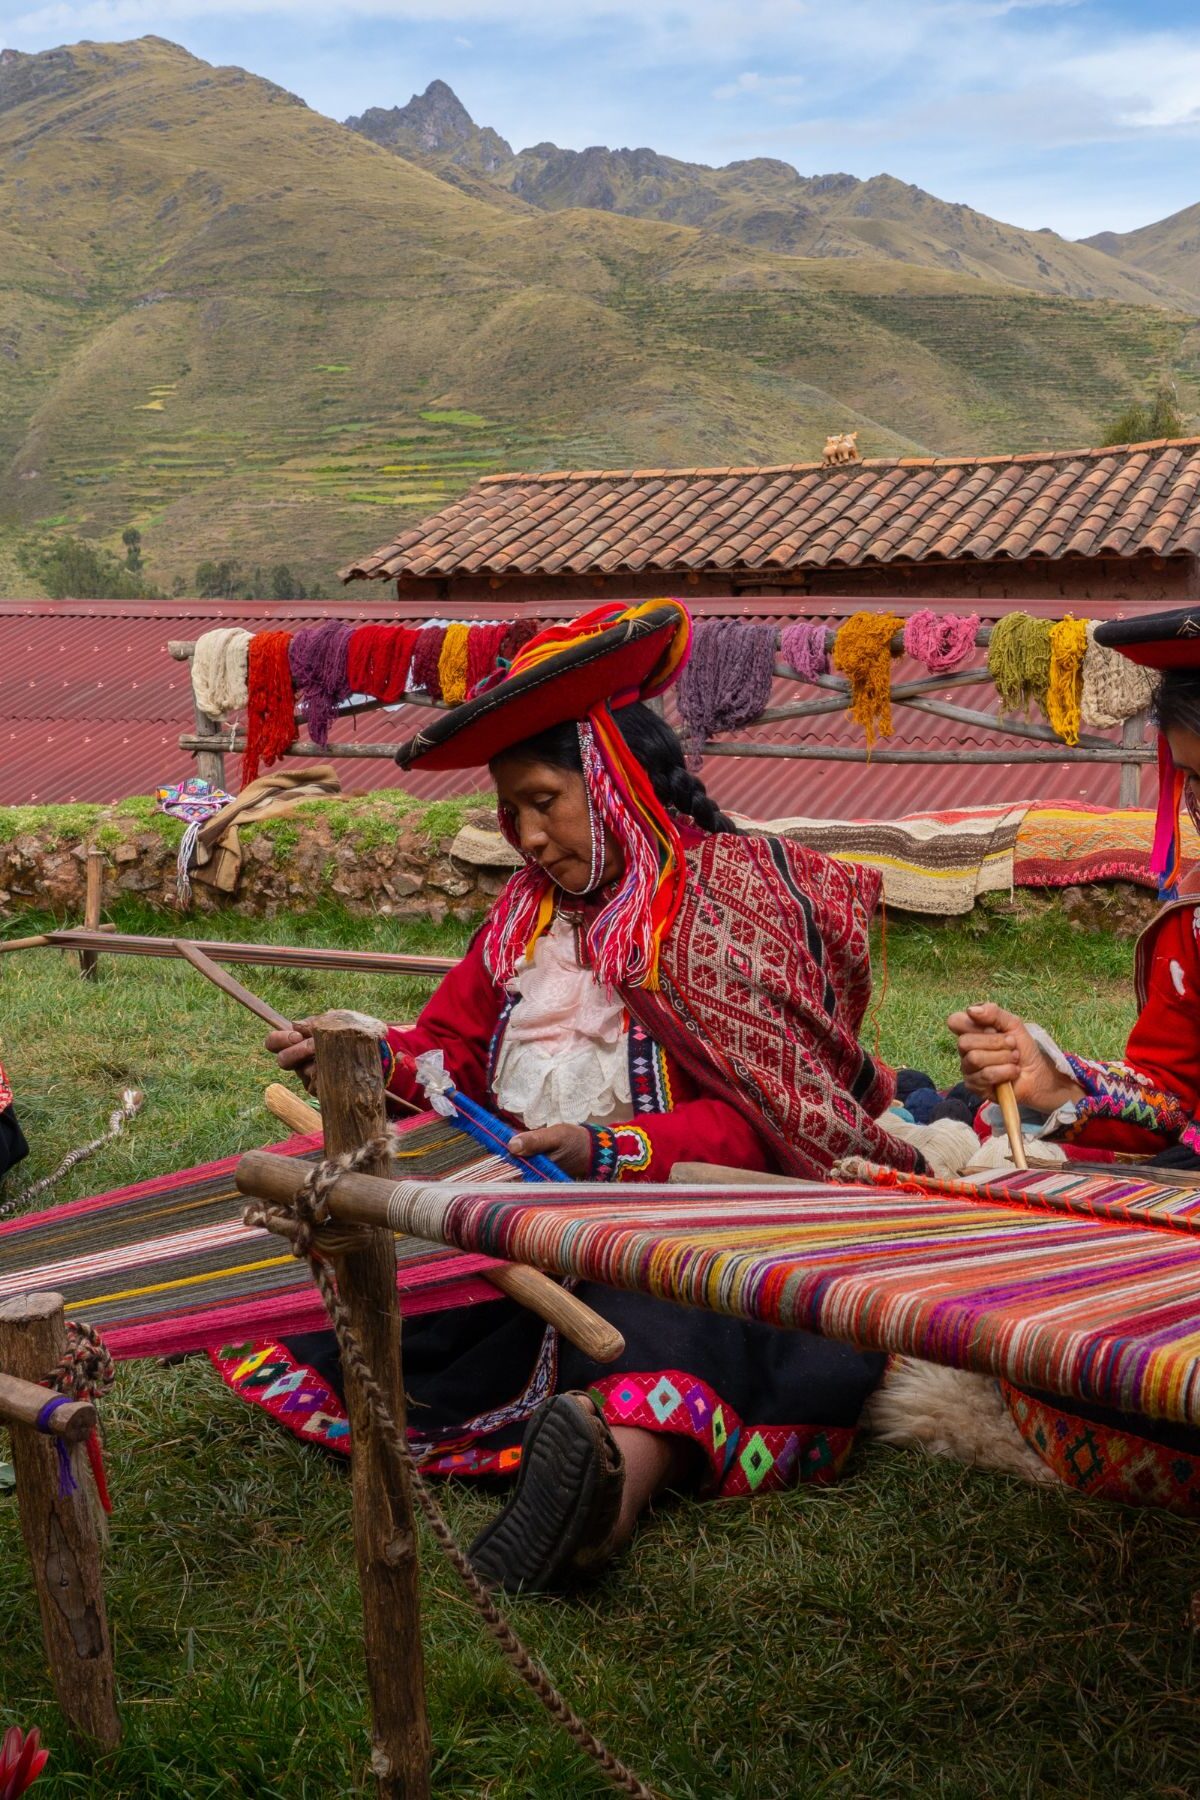 Three local female weavers in colourful traditional local dress including festooned hats, weaving colourful alpaca wool on the ground, Chumbe Community, Lamay, Sacred Valley, Peru (3 Model Releases and Property Release) - stock photo